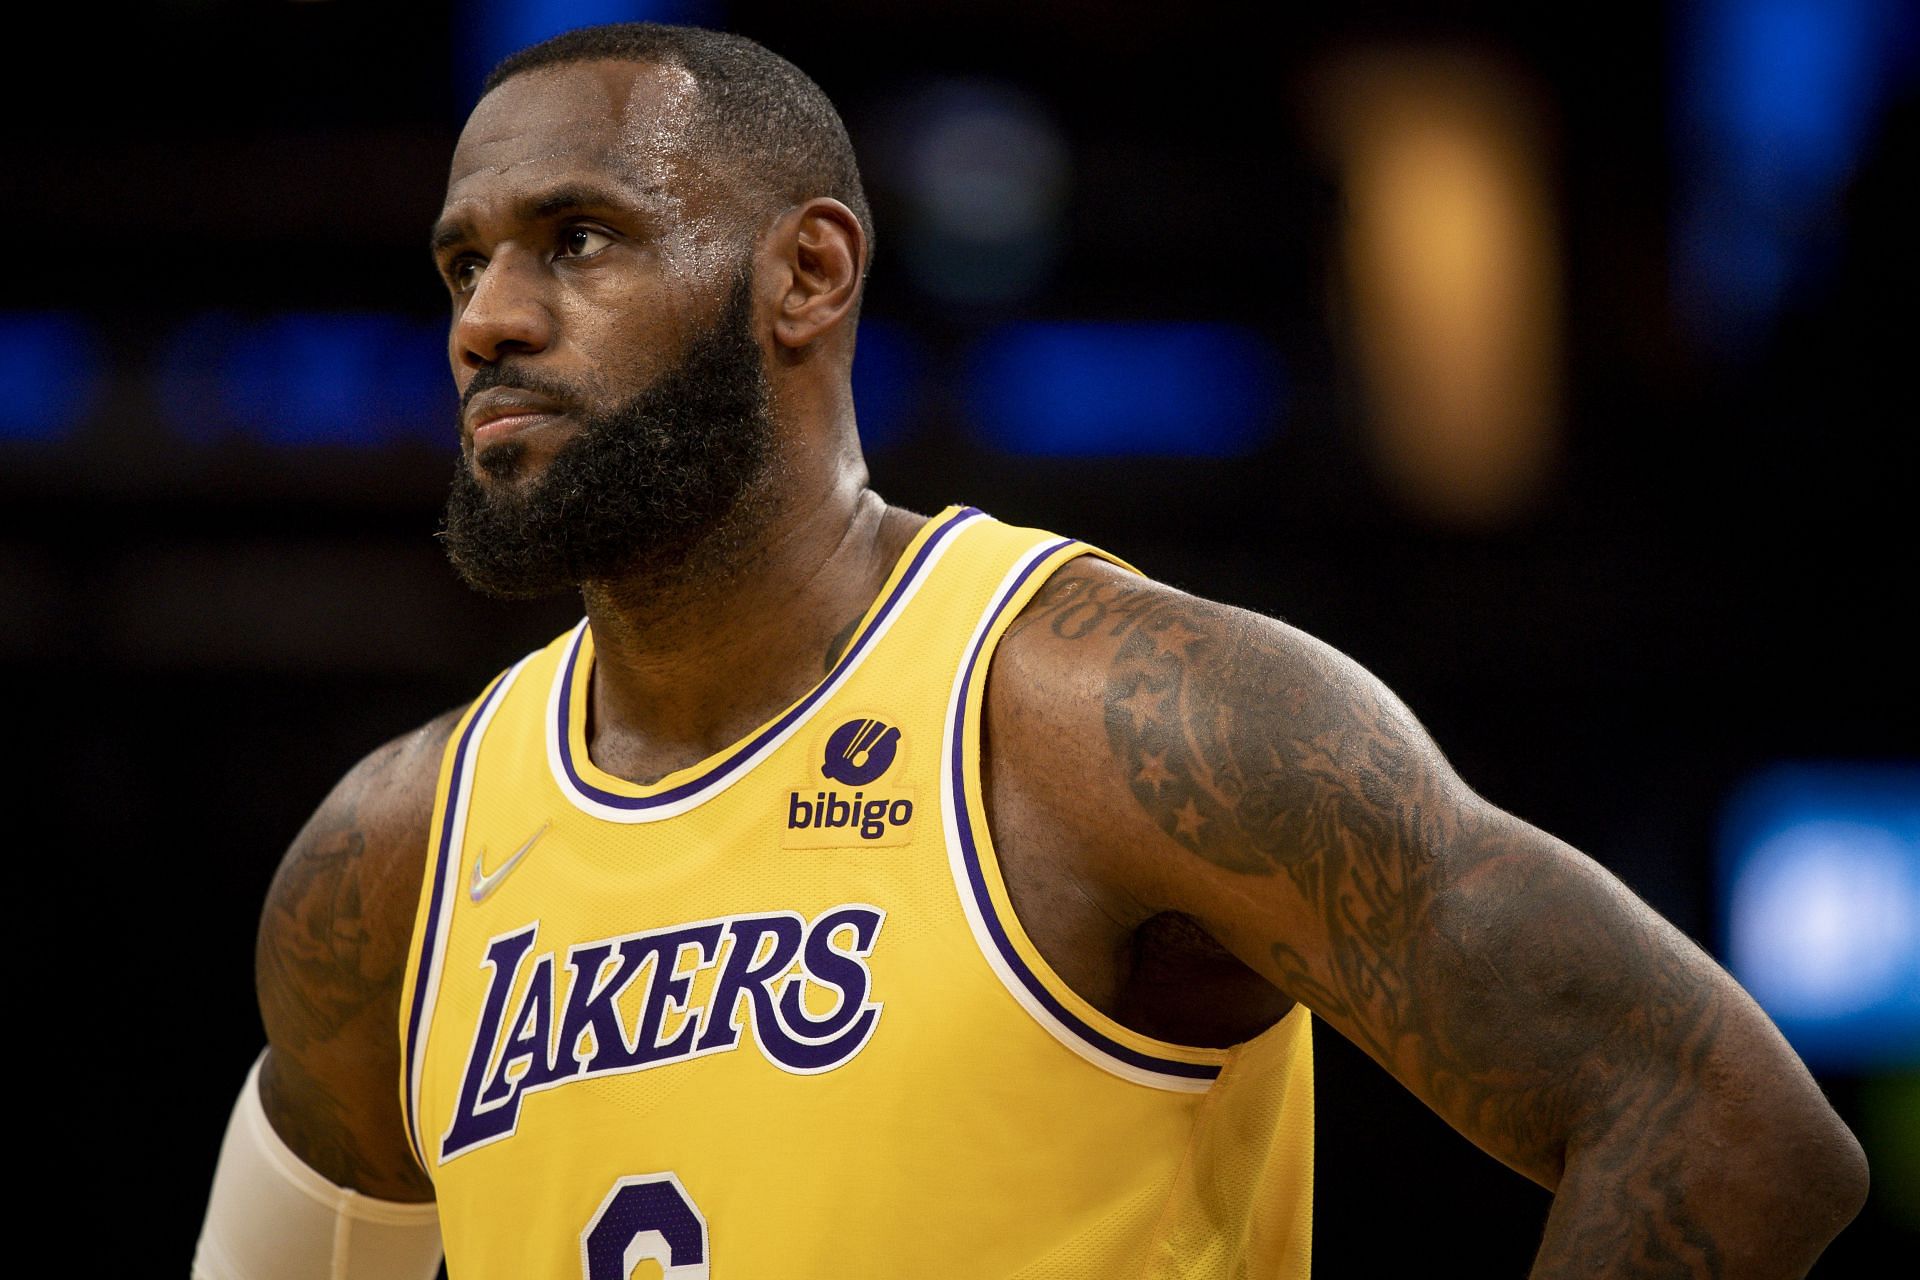 LeBron James has been handed a one-game suspension by the NBA for his altercation with Isaiah Stewart